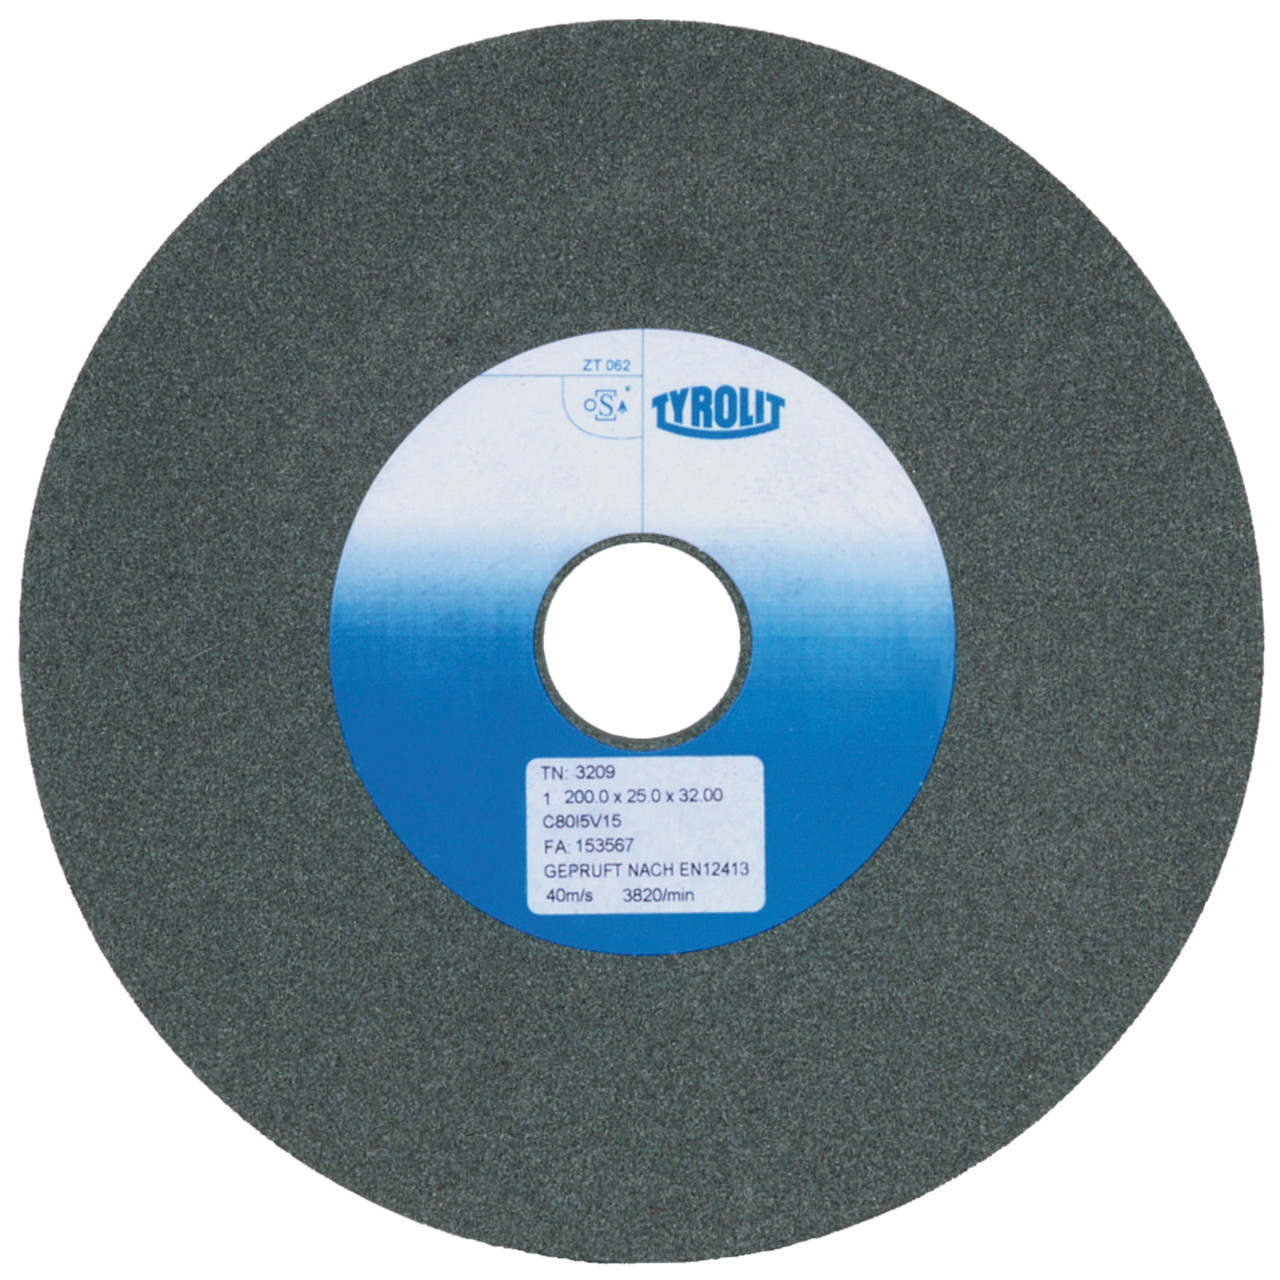 Tyrolit Rotary dressing DxDxH 250x12x51 Dressing discs for diamond and CBN grinding wheels, shape: 1, Art. 250491